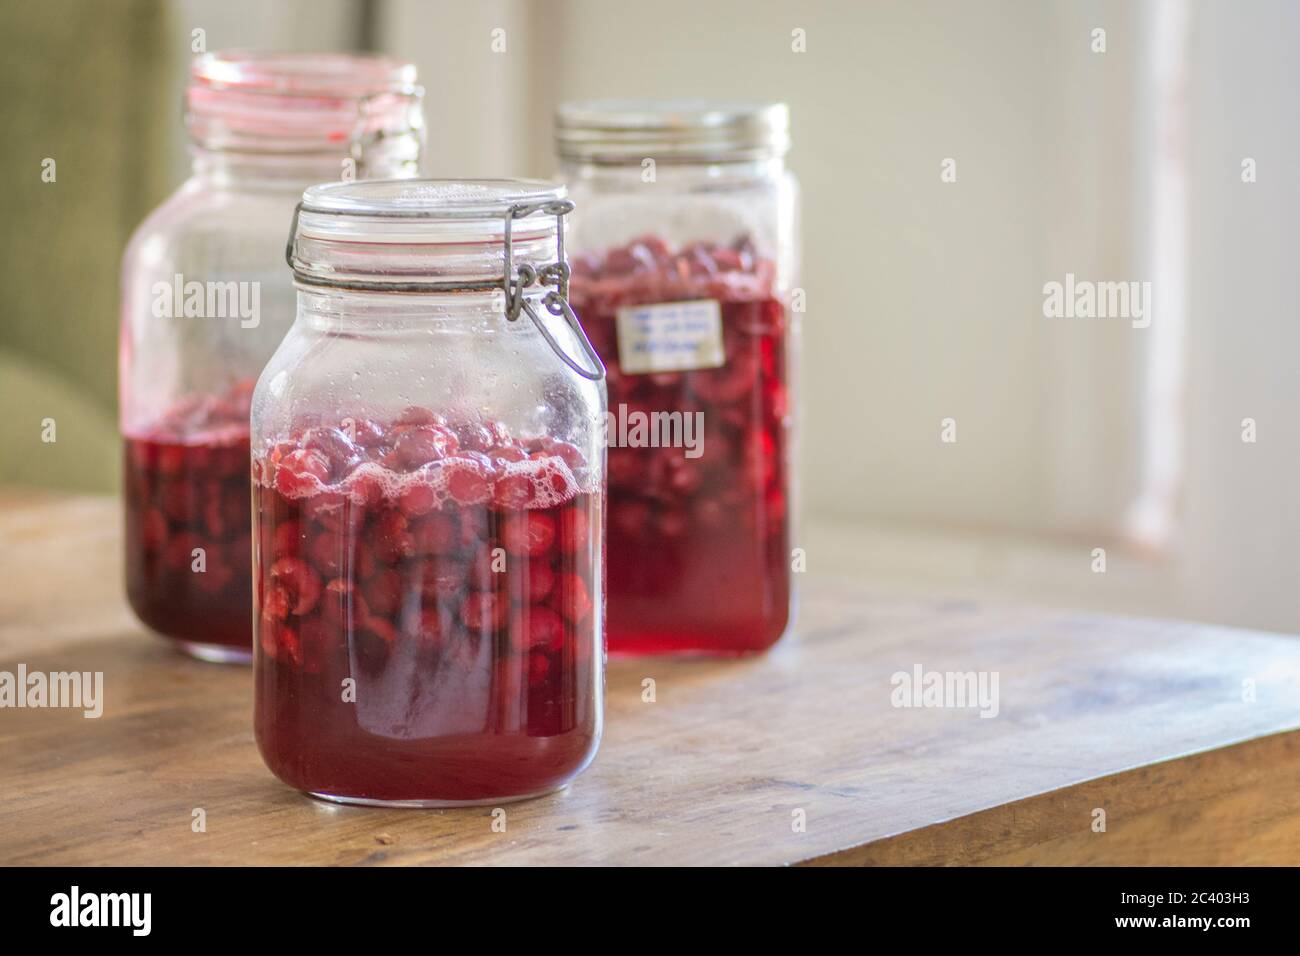 Homemade Vishniac or Visinata liqueur, made of sour Vishnia Cherries. The fruits are being fermented in a glass jar. Stock Photo